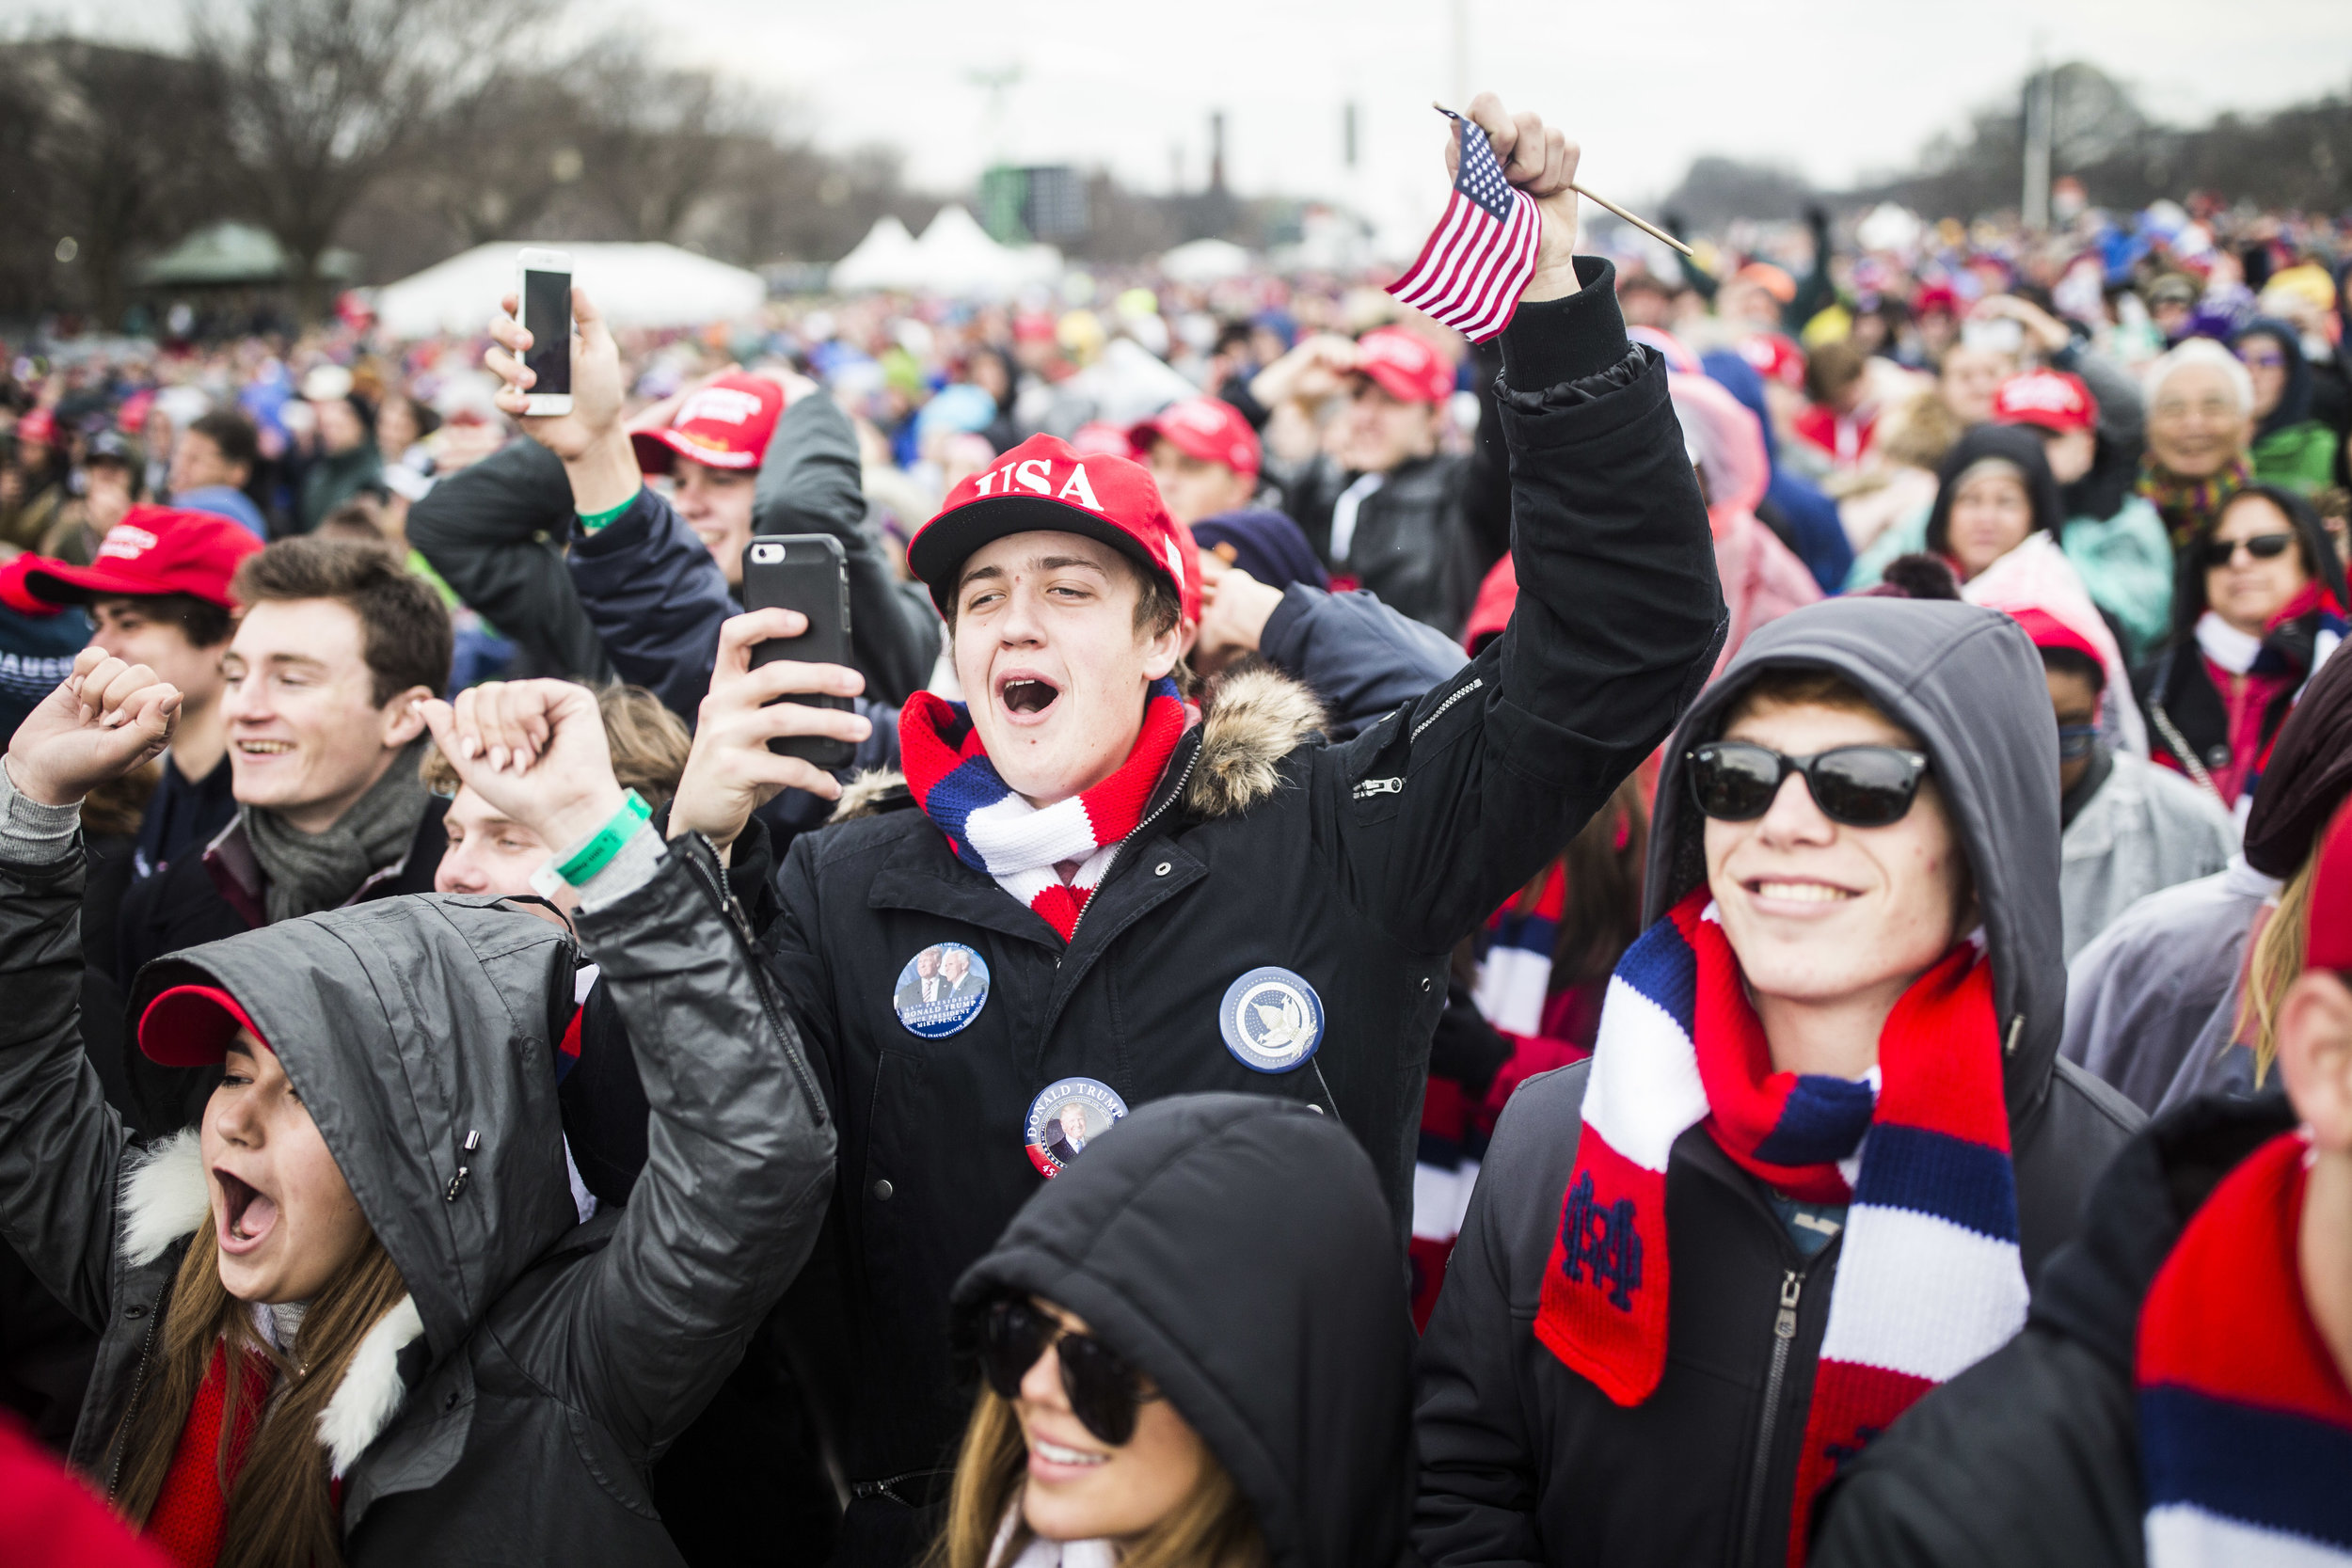  Donald Trump's supporters on National Mall celebrate him finishing his inauguration speech 